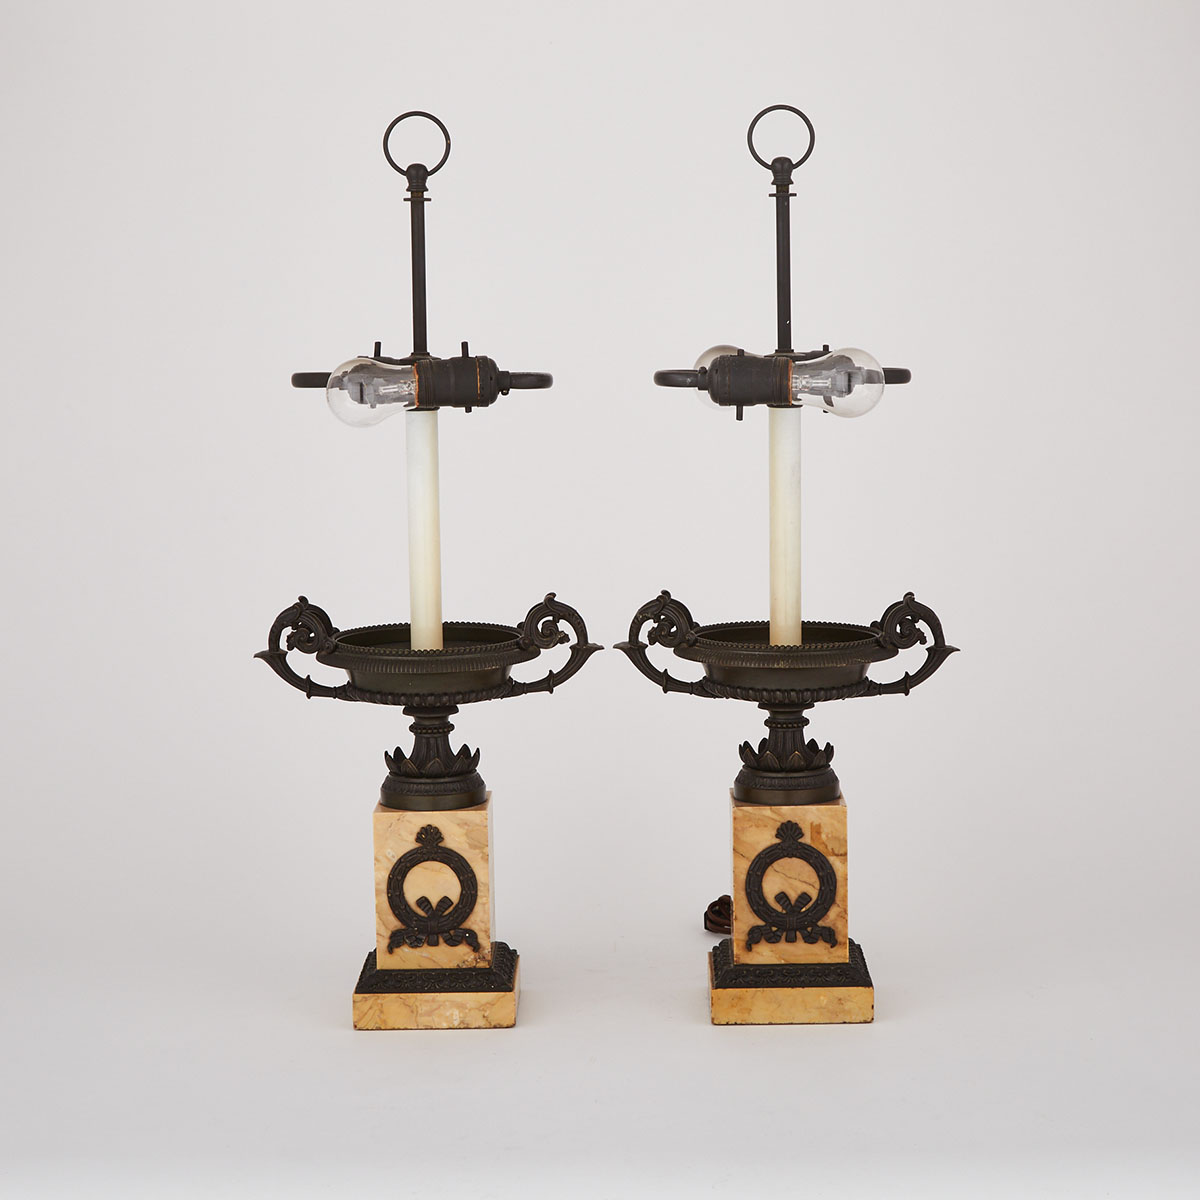 Pair of French Bronze and Sienna Marble Tazza Garniture Table Lamps, 19th century